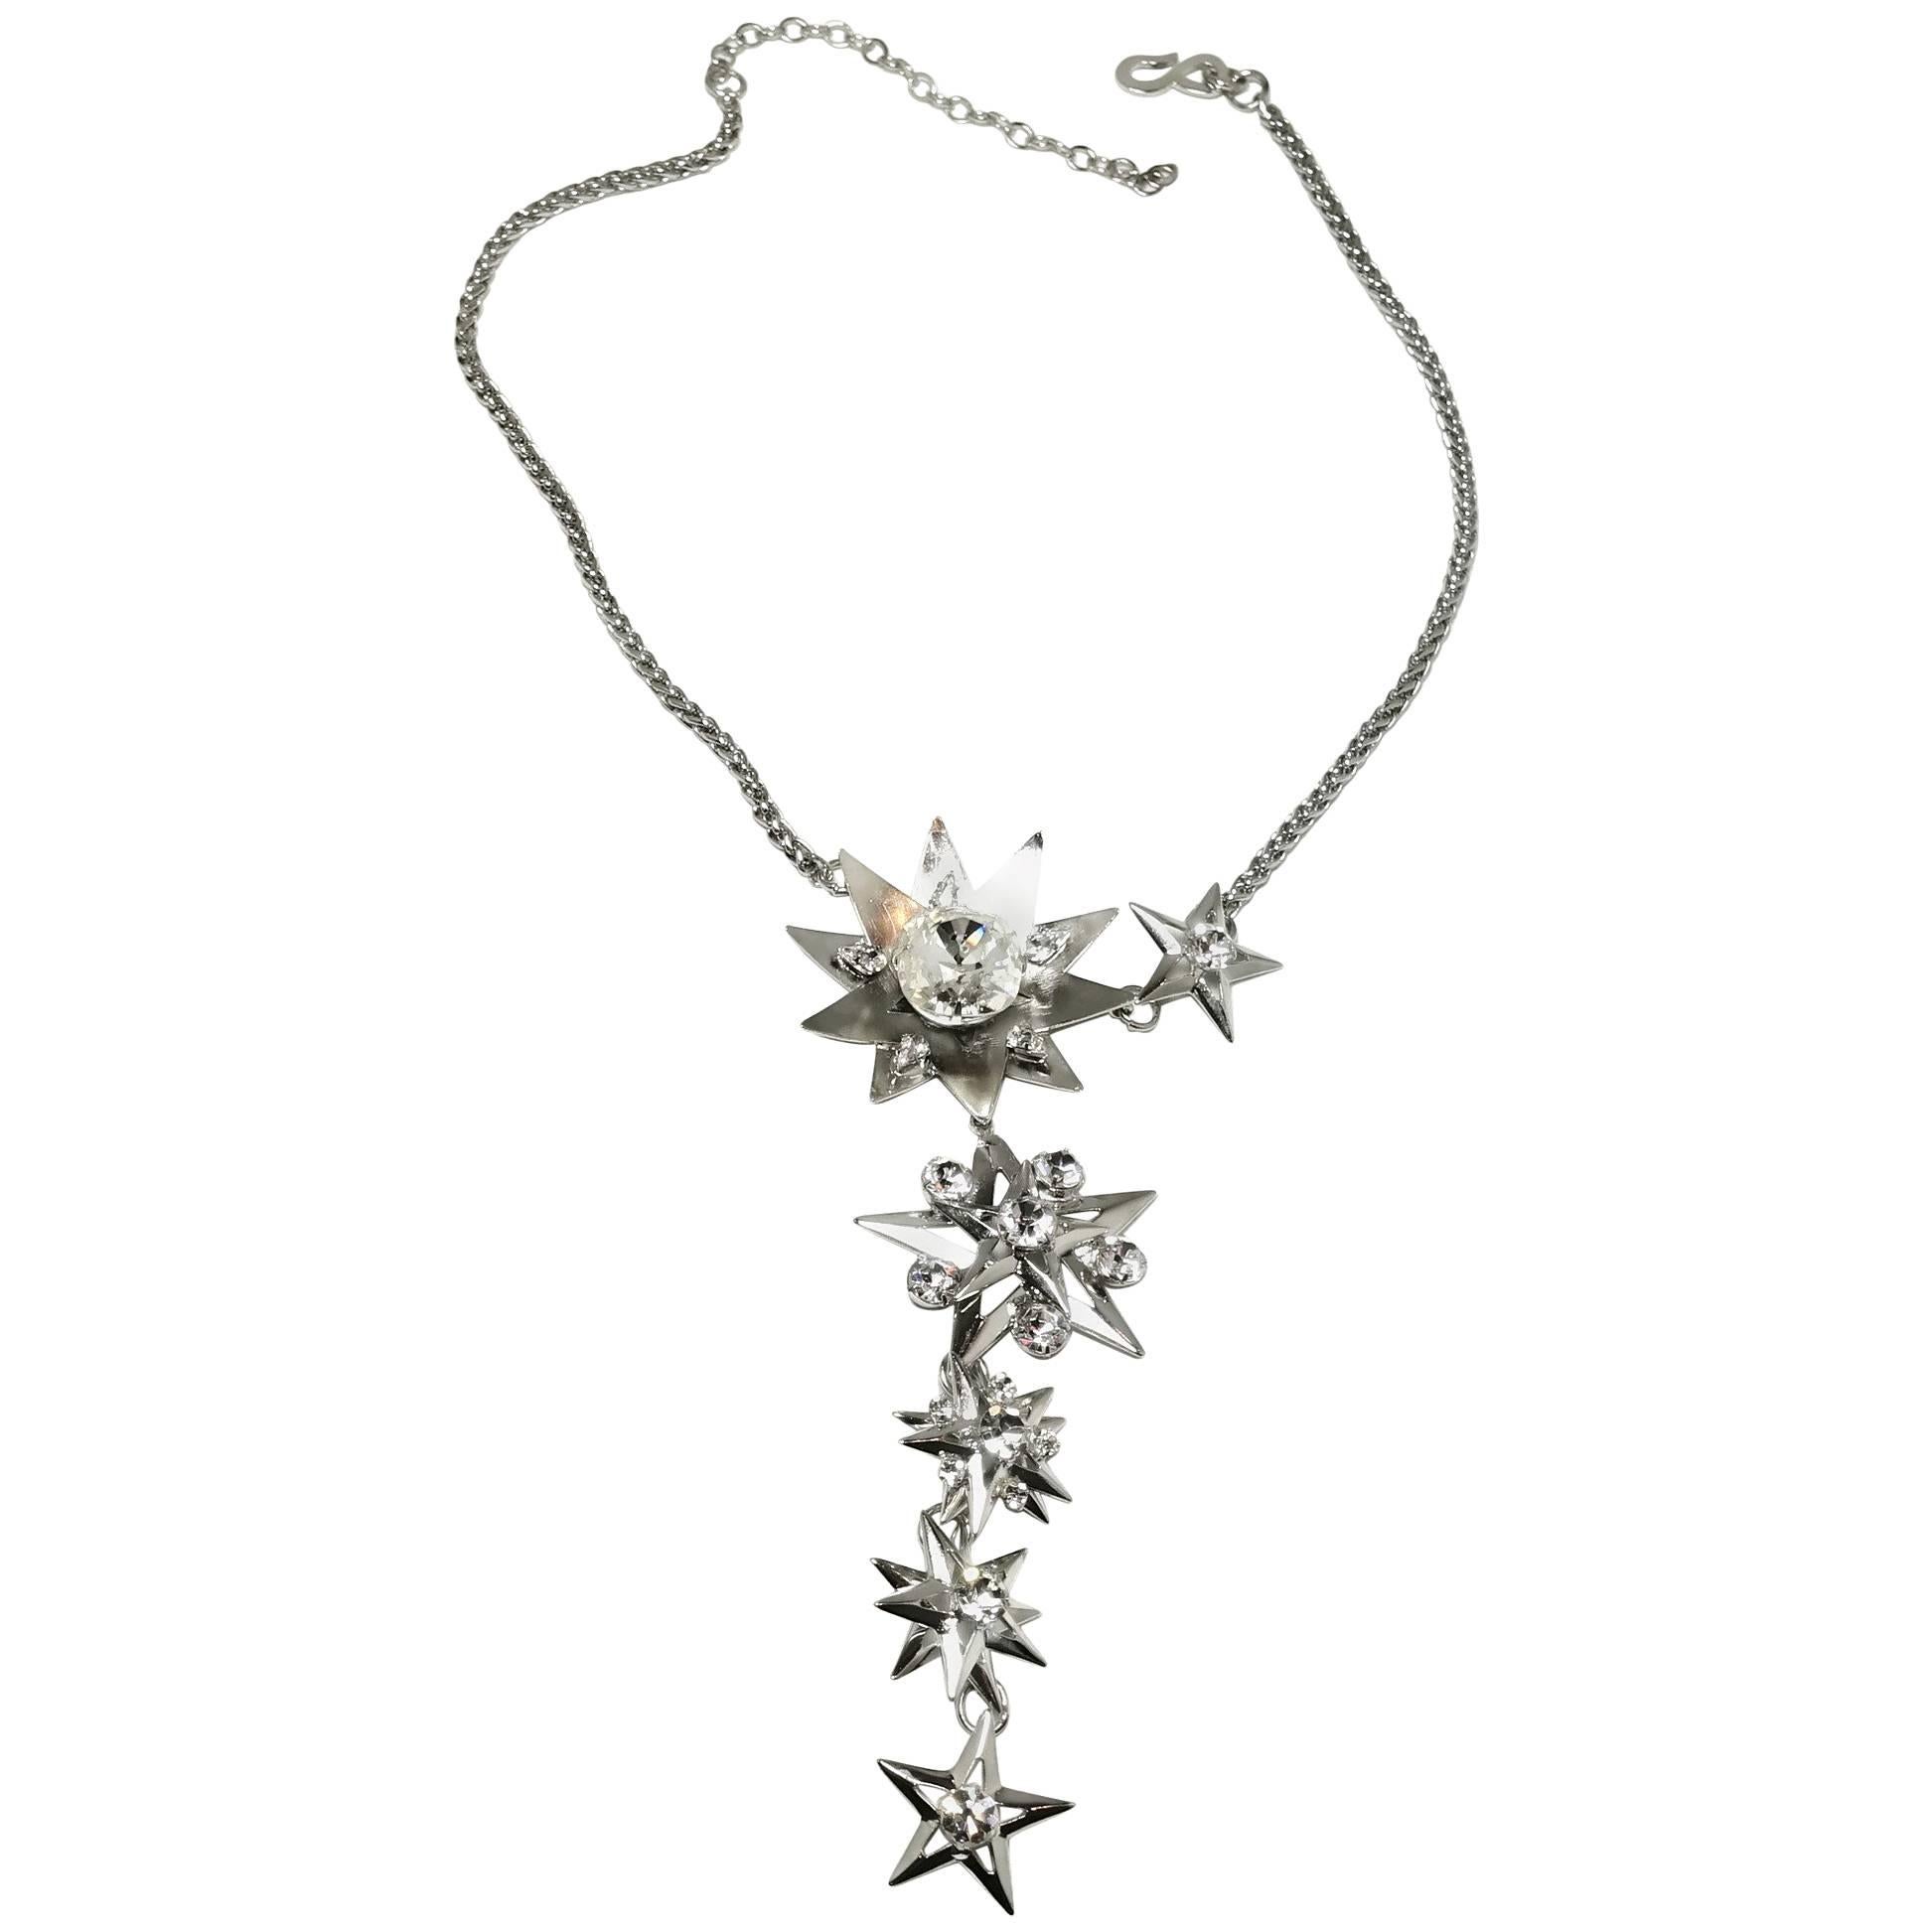 One-of-a-Kind Robert Sorrell Stars & Crystal Drop Necklace